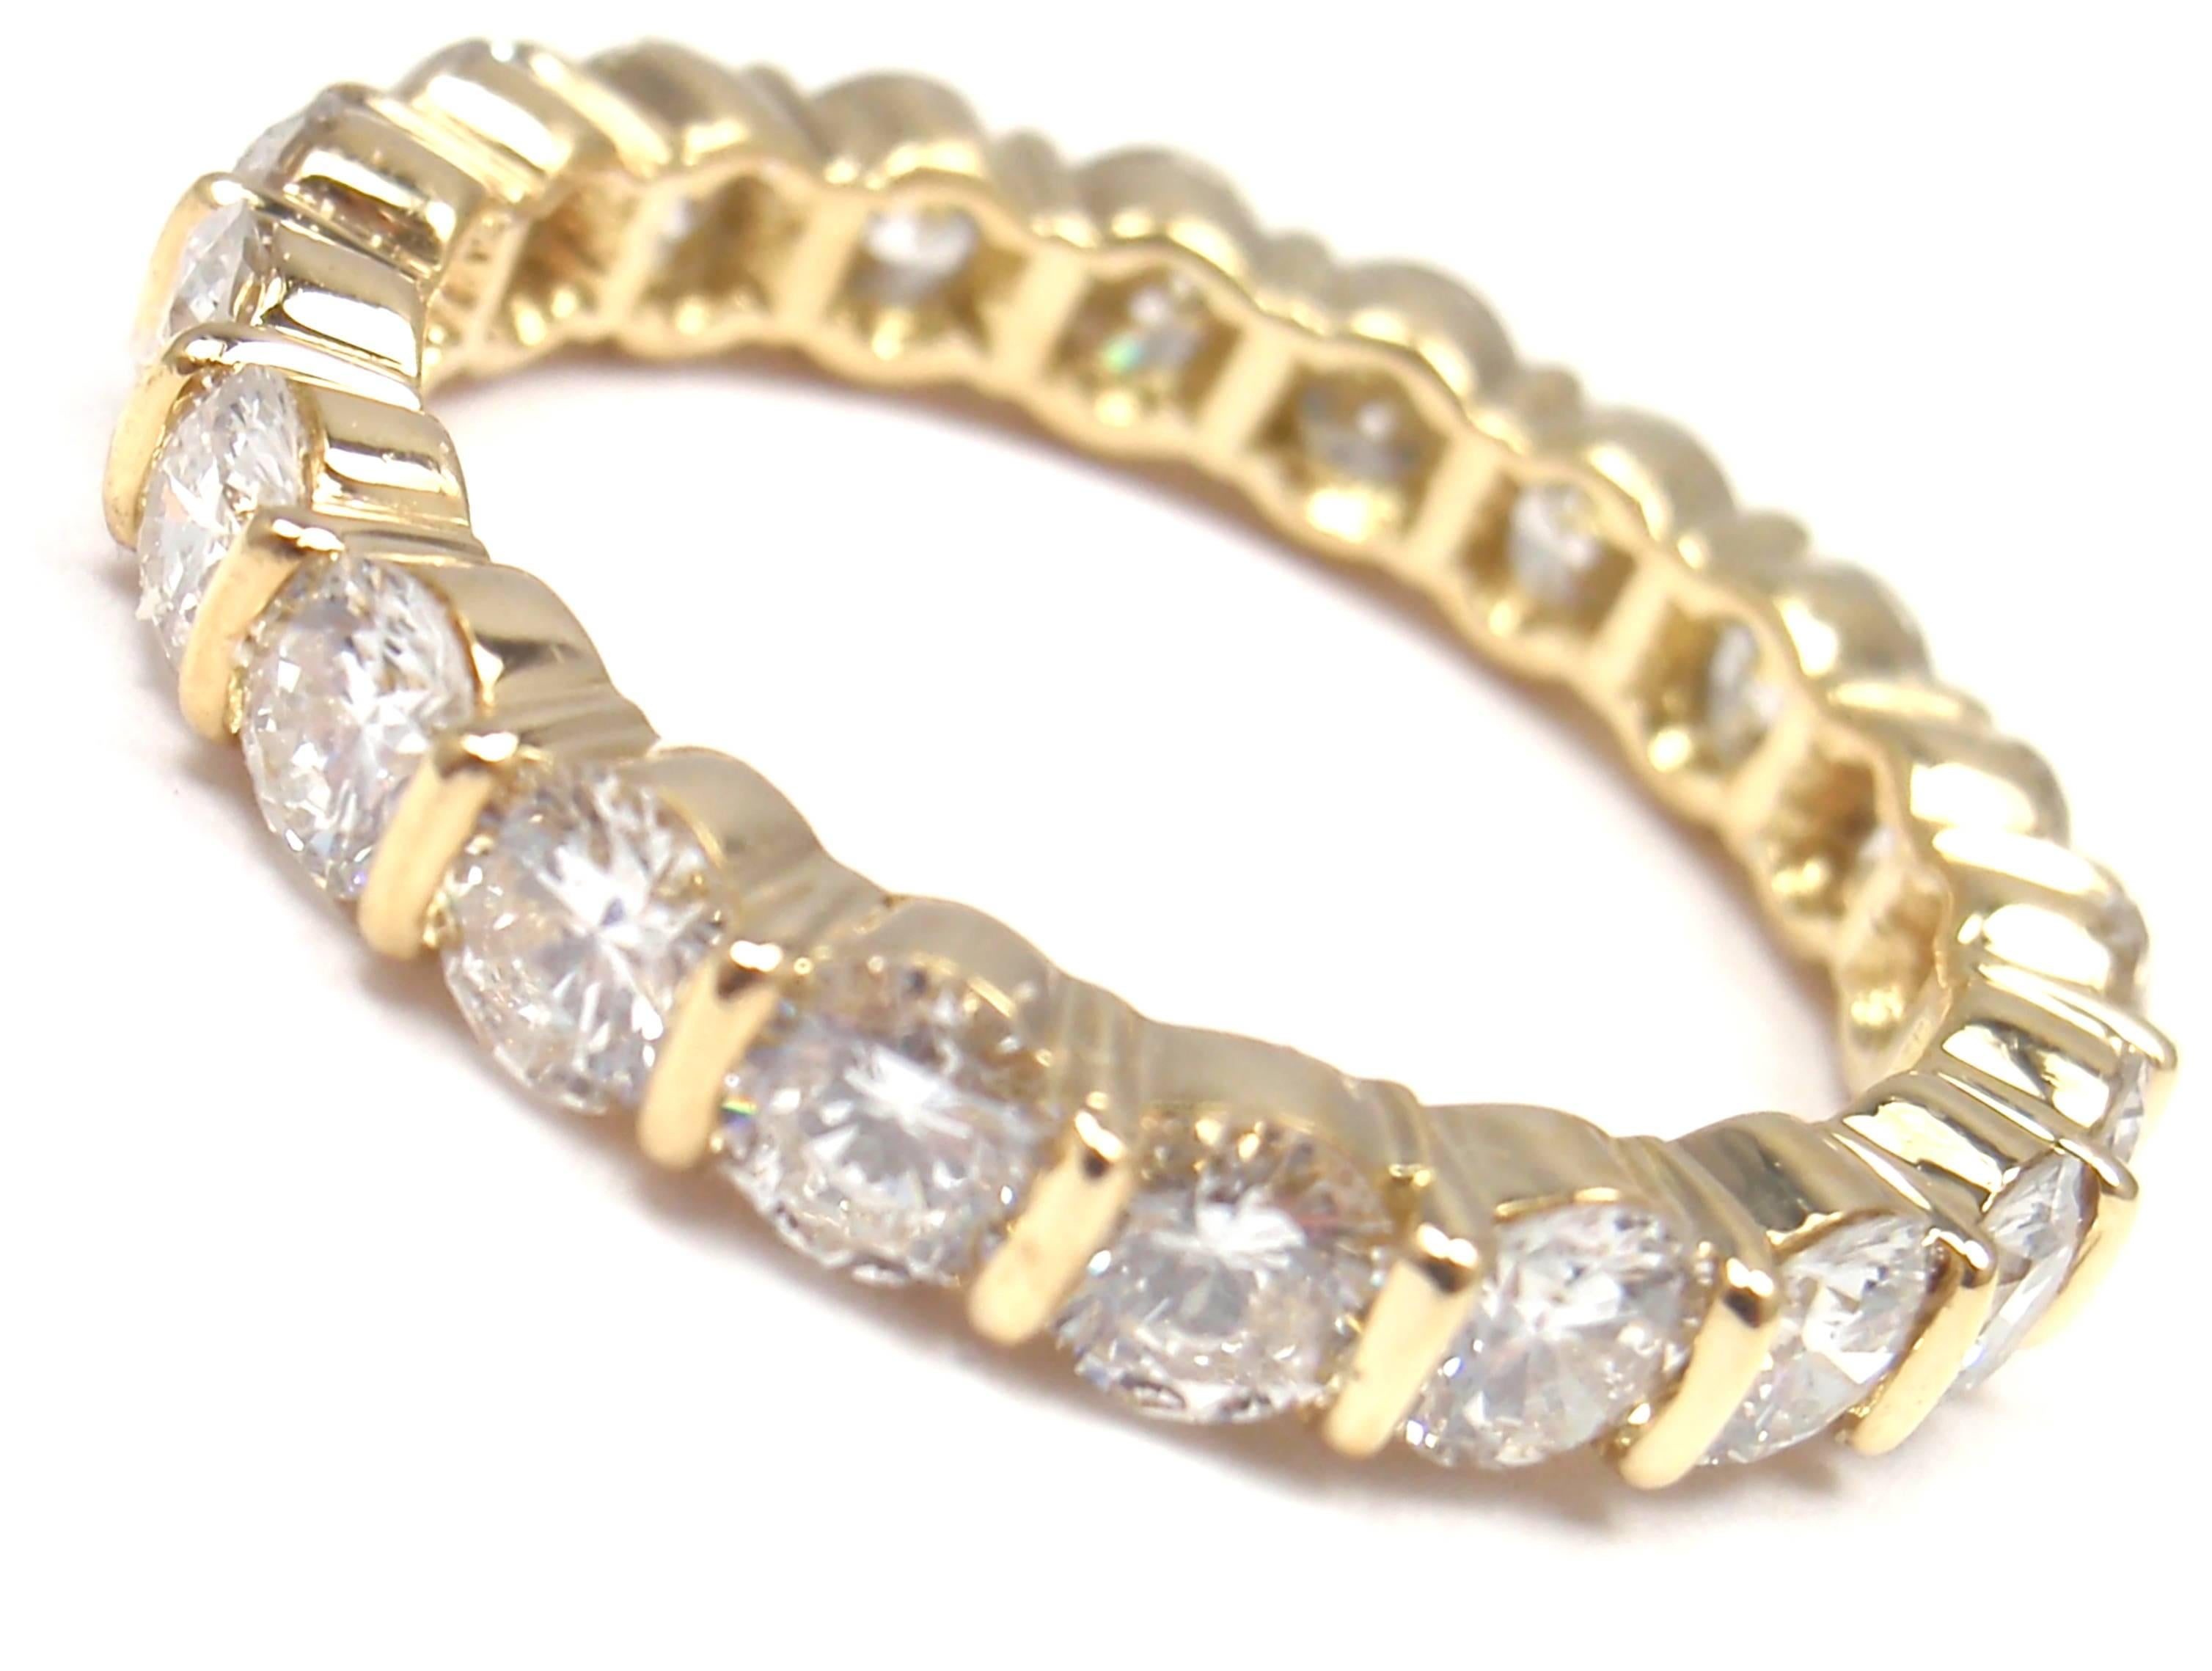 18k Yellow Gold Diamond Eternity Wedding Band Ring by Tiffany & Co. 
With 20 round brilliant cut diamonds VS1 clarity, G color total weight 
approx. 2ct
Details: 
Ring Size: 6
Weight: 2.7 grams 
Width: 3.5mm 
Stamped Hallmarks: T&Co 750

*Free